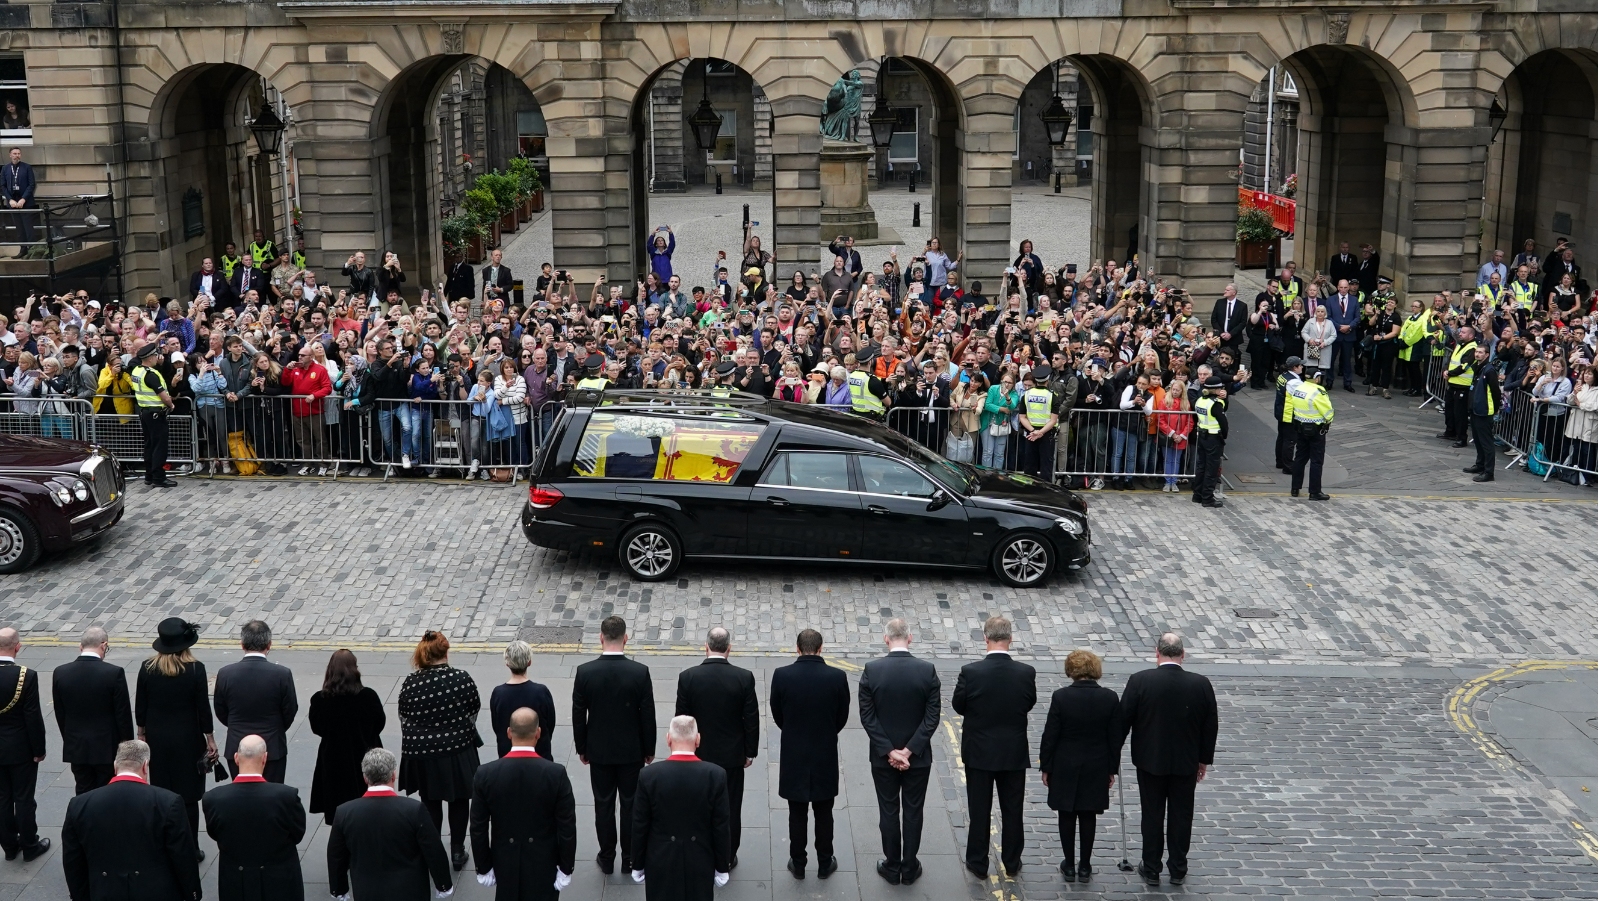 Crowds watch the cortege carrying the Queen's coffin